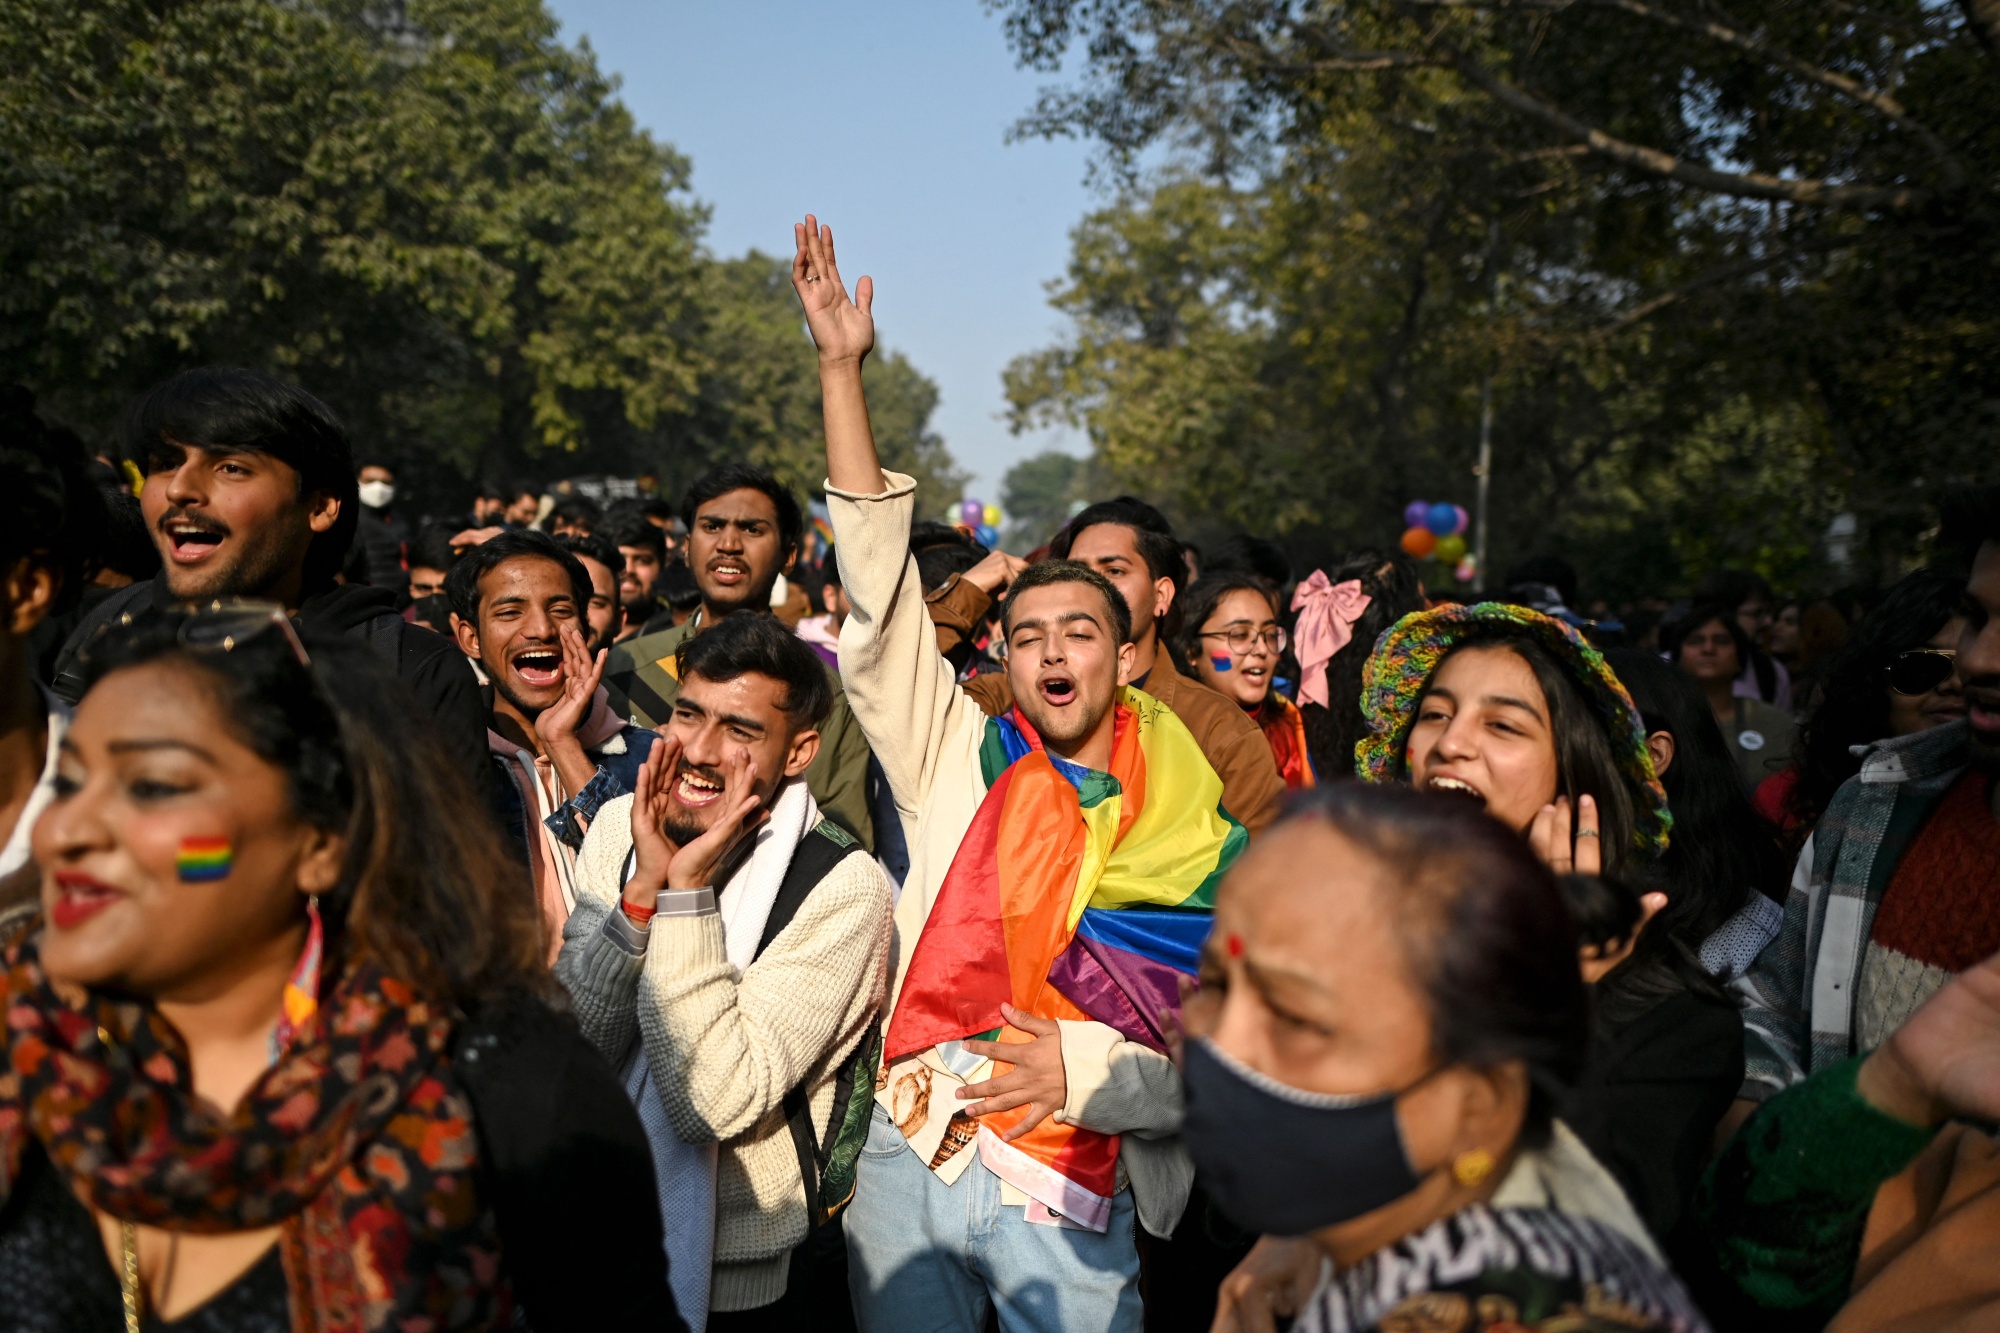 Swath Indians Fucking Hd Videos - Why Modi's India Could Legalize Same-Sex Marriage This Year - Bloomberg